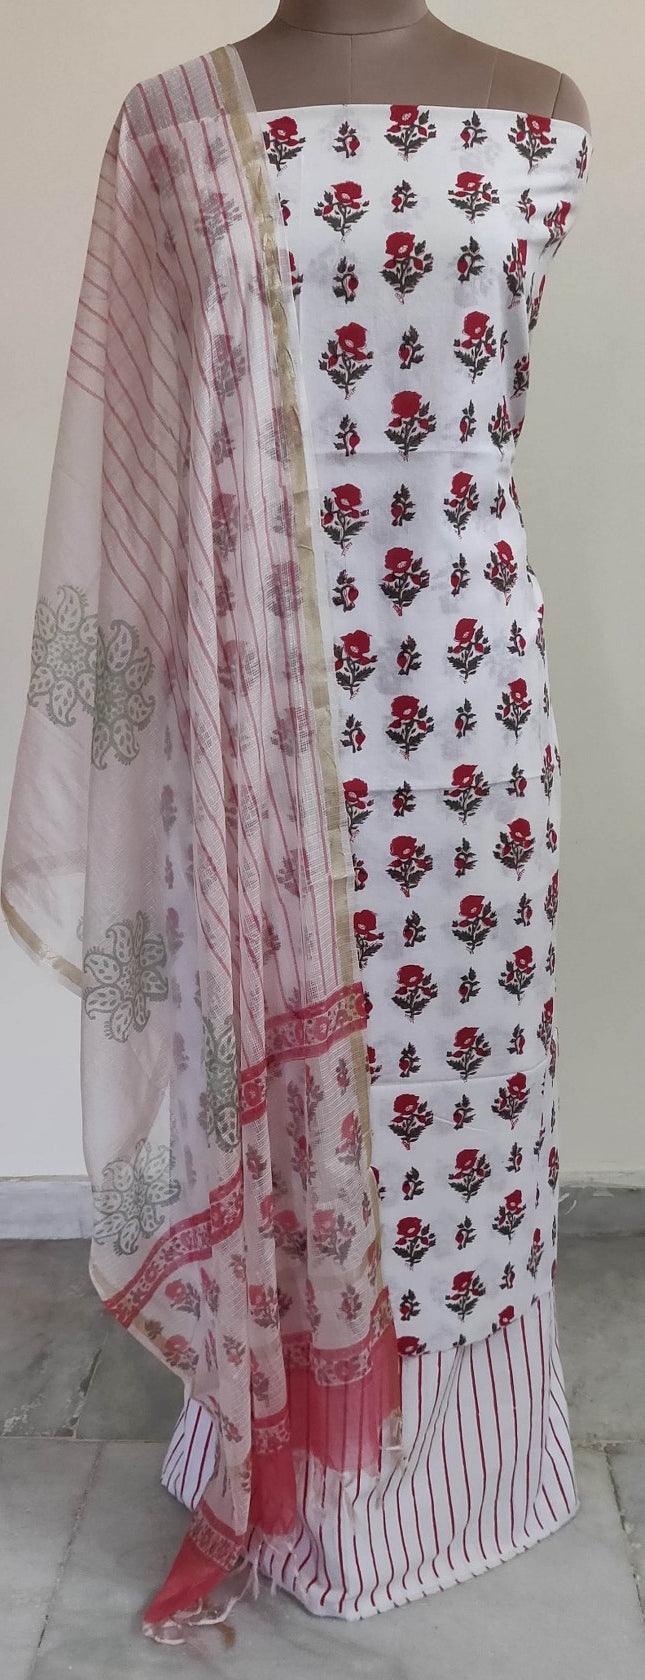 Off White Block Printed Suit with Kota Dupatta BPK29 - Ethnic's By Anvi Creations